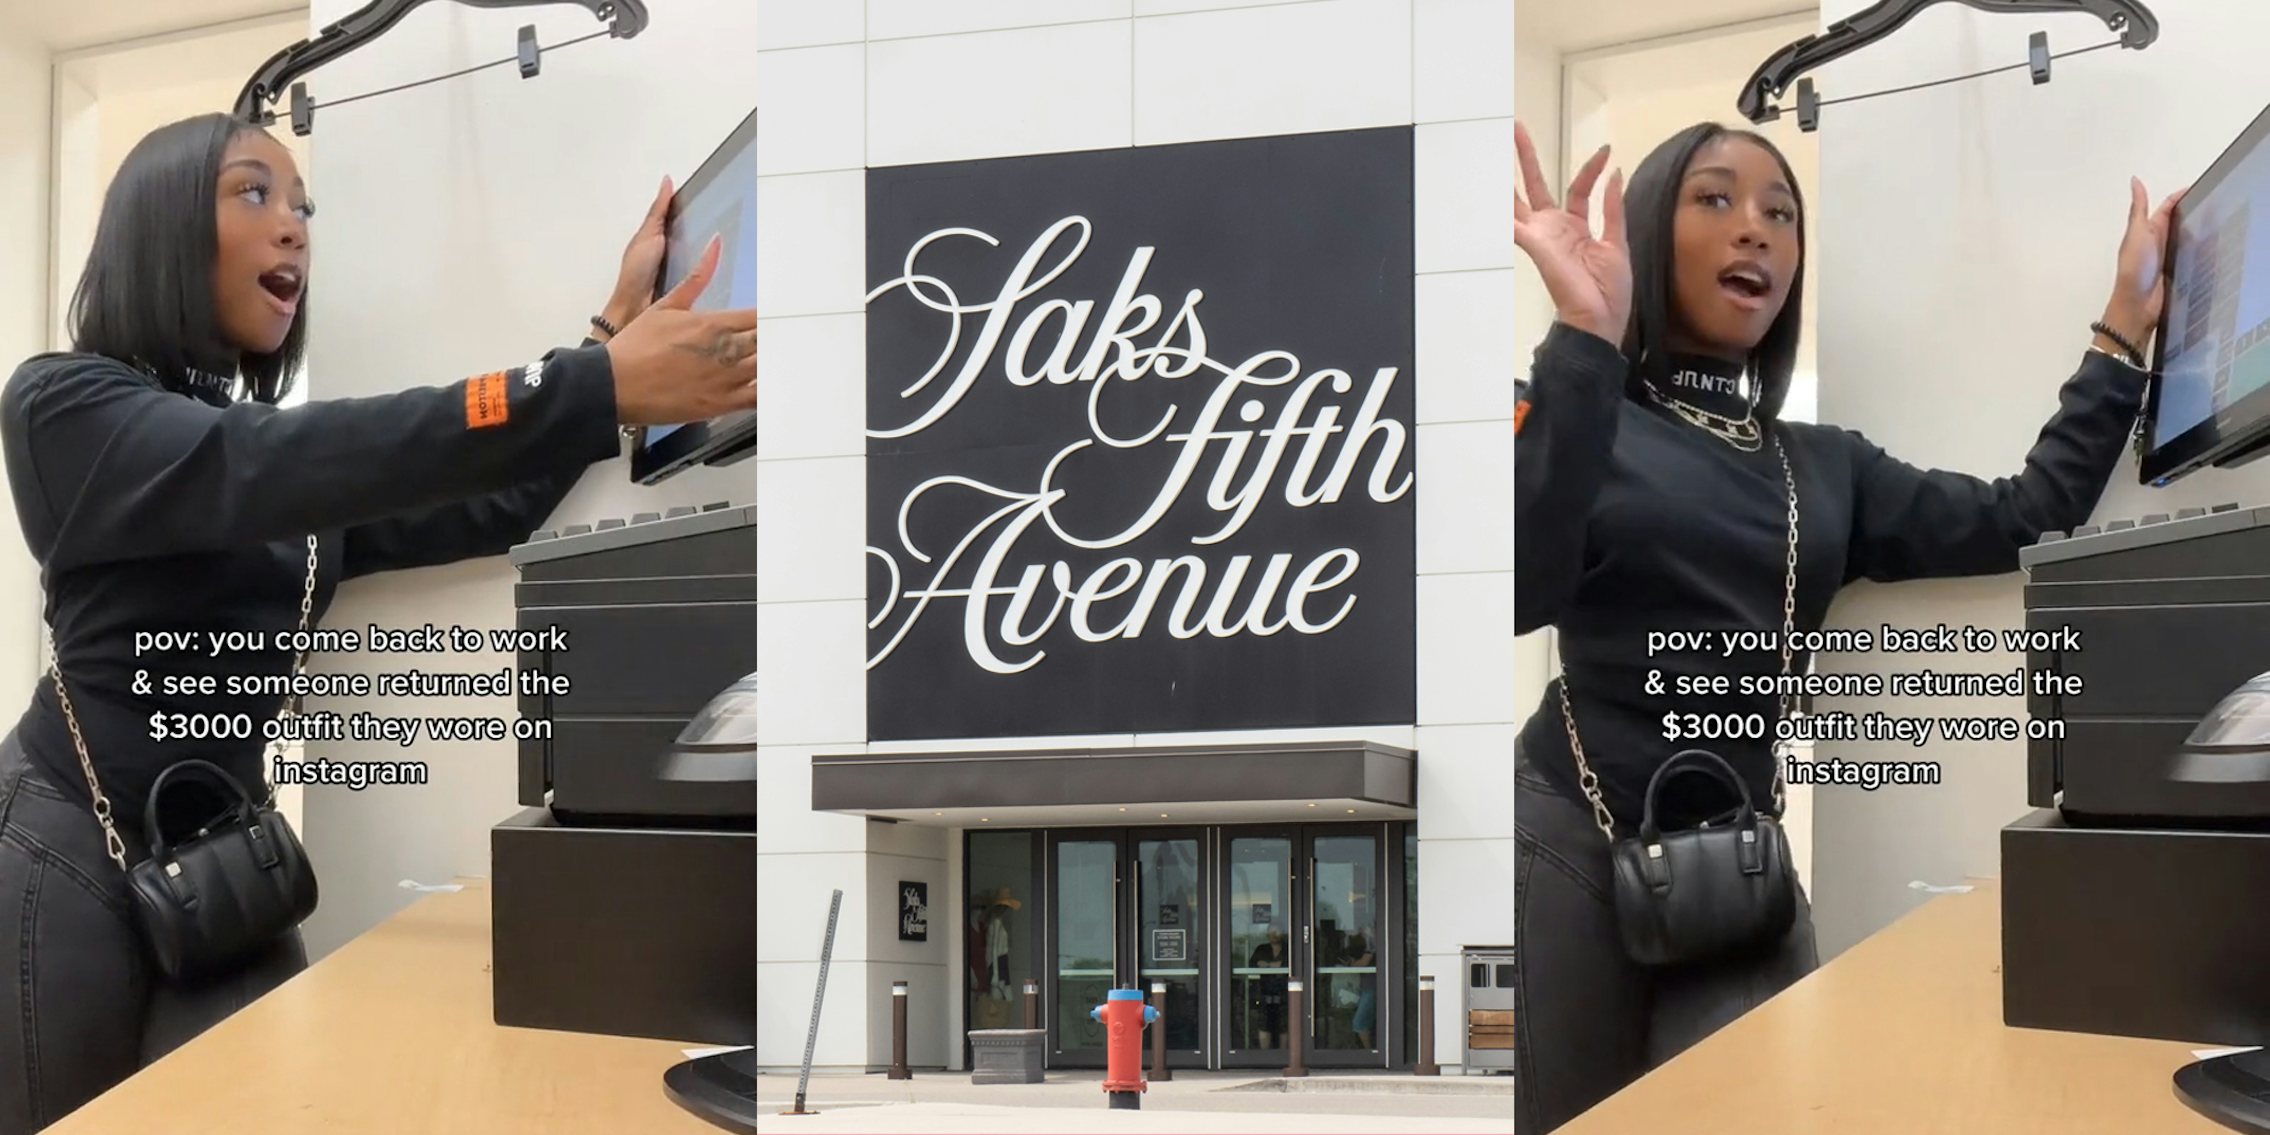 When A Miami Luxury Mall Sues To Evict Its Saks Fifth Avenue, Saks Files A  Countersuit